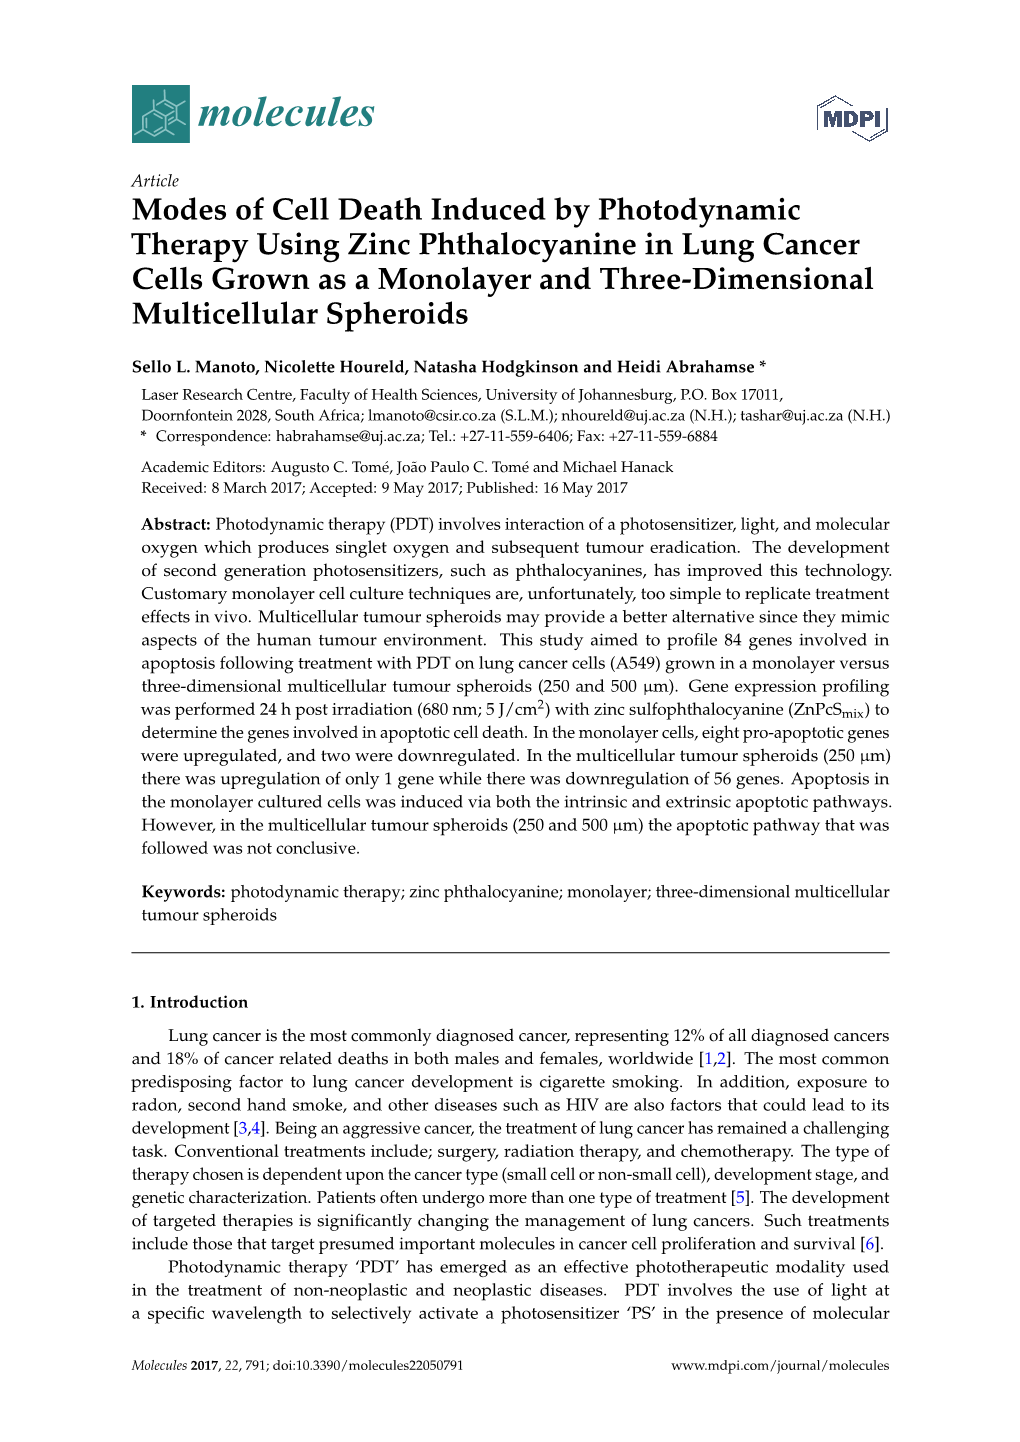 Modes of Cell Death Induced by Photodynamic Therapy Using Zinc Phthalocyanine in Lung Cancer Cells Grown As a Monolayer and Three-Dimensional Multicellular Spheroids